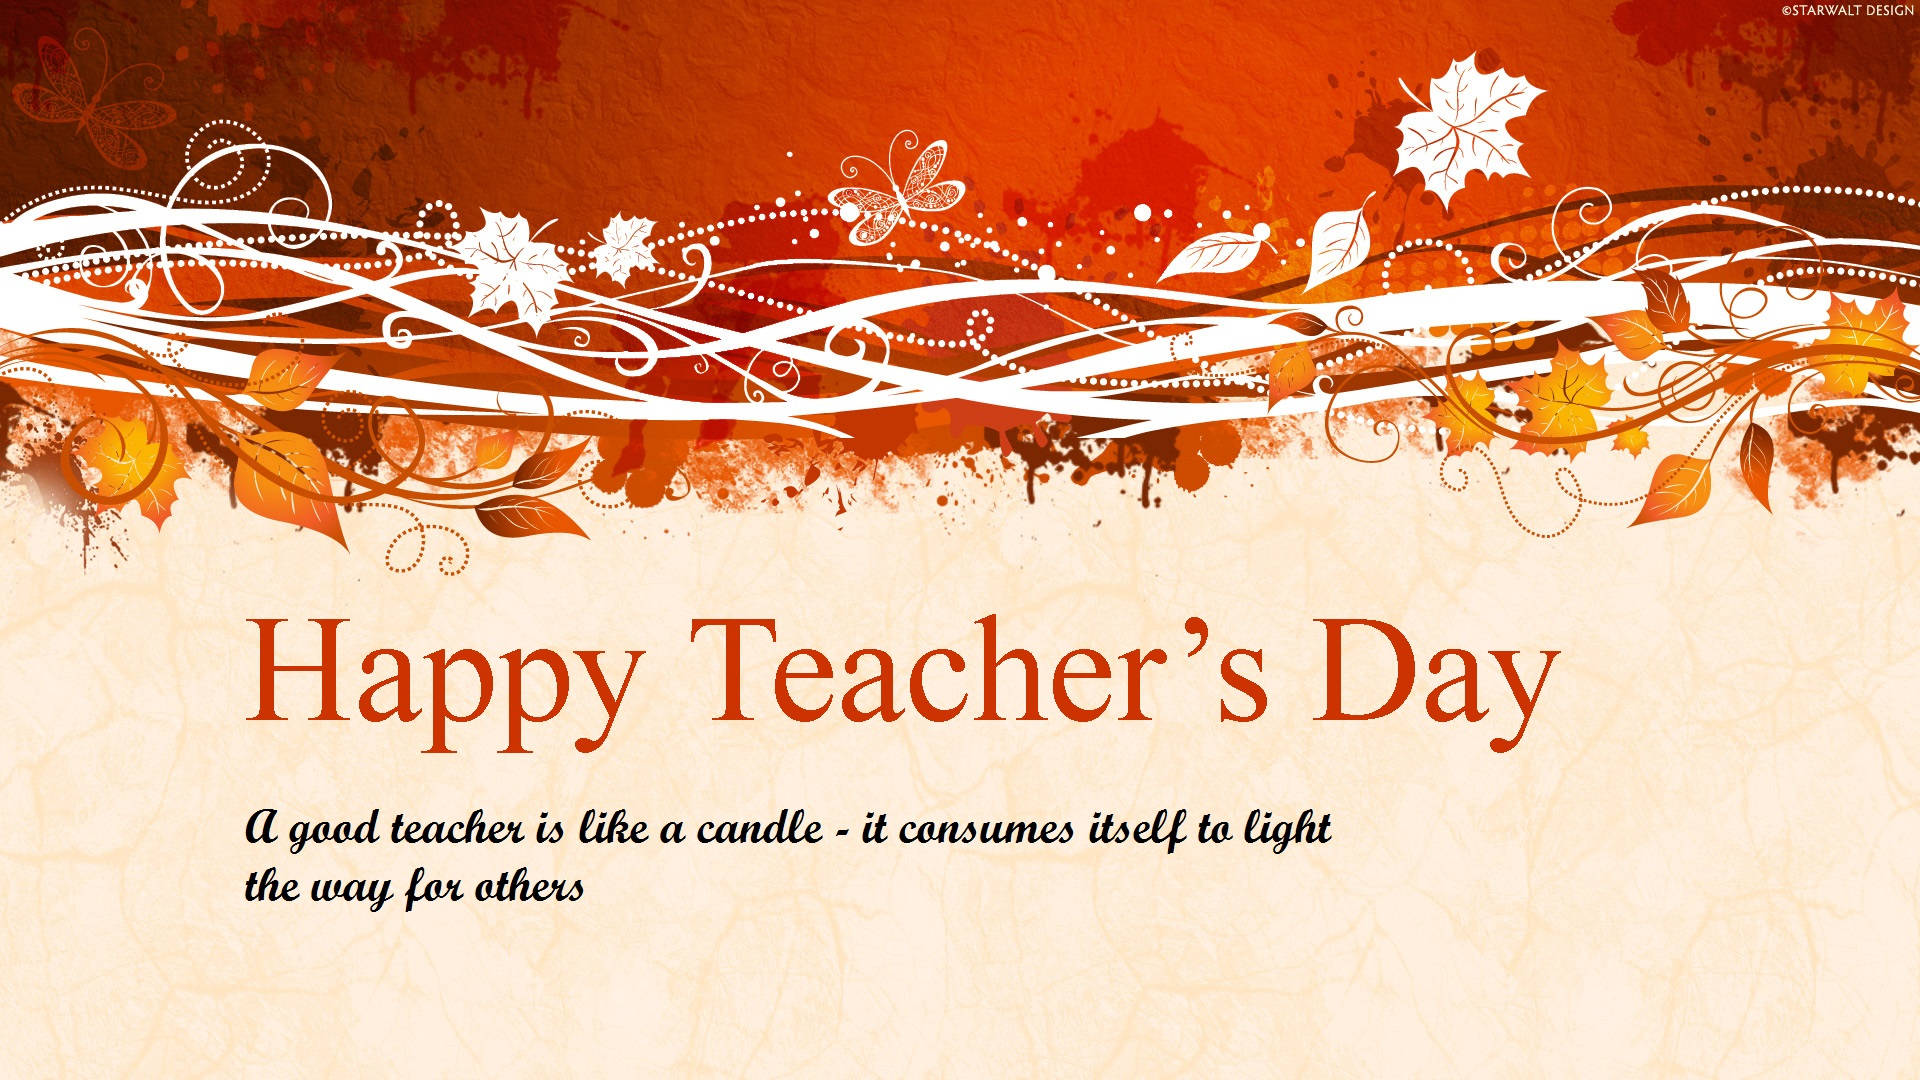 Happy Teachers' Day Candle Light Wallpaper